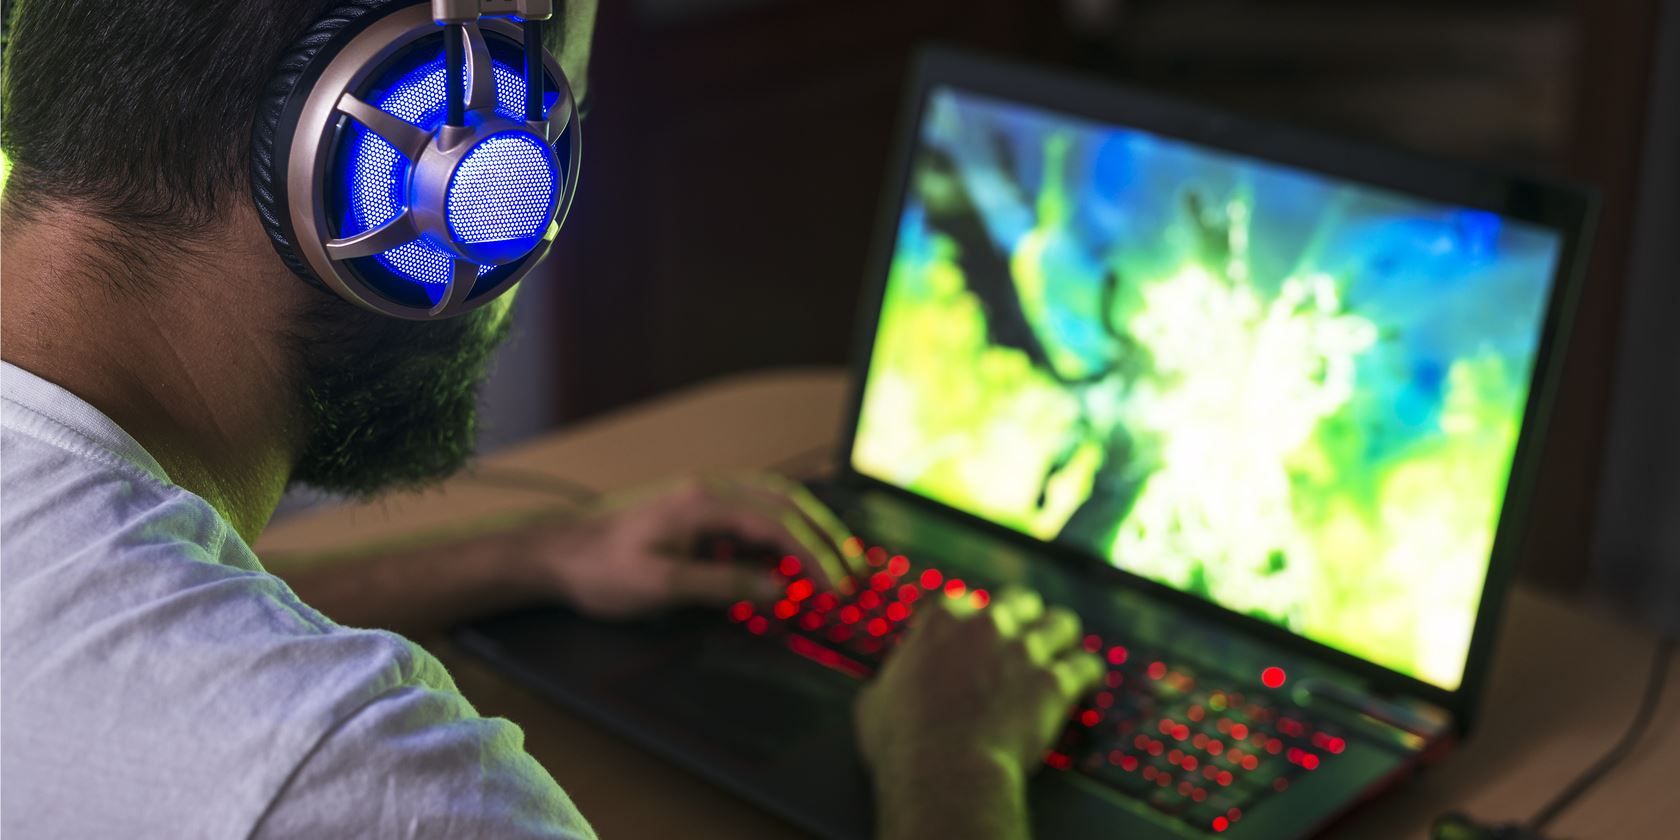 12 Ways to Improve Gaming Performance on Your Laptop